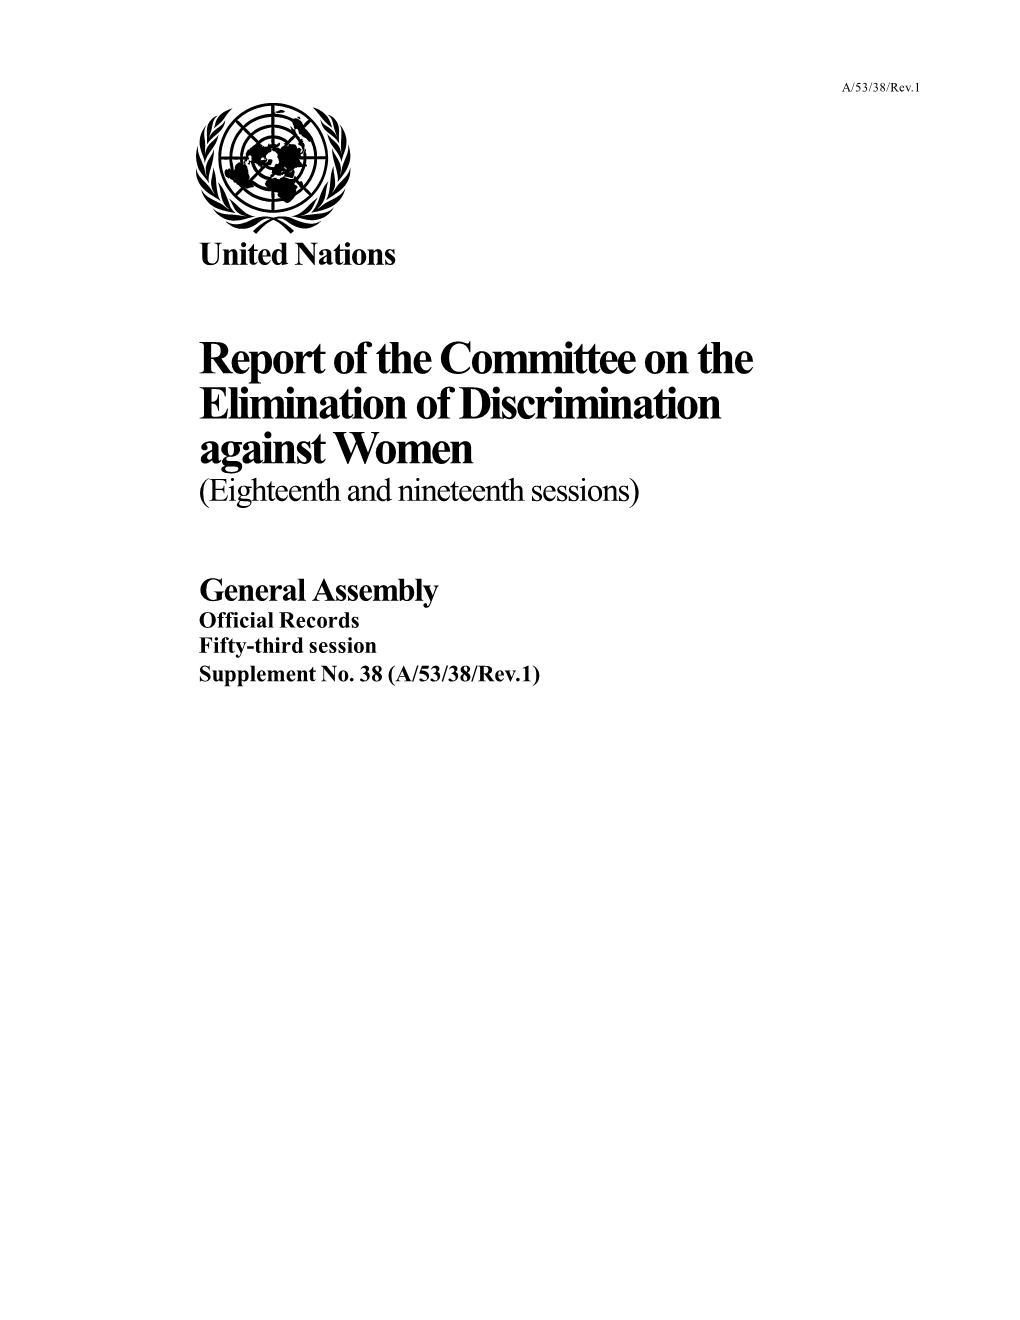 Report of the Committee on the Elimination of Discrimination Against Women (Eighteenth and Nineteenth Sessions)